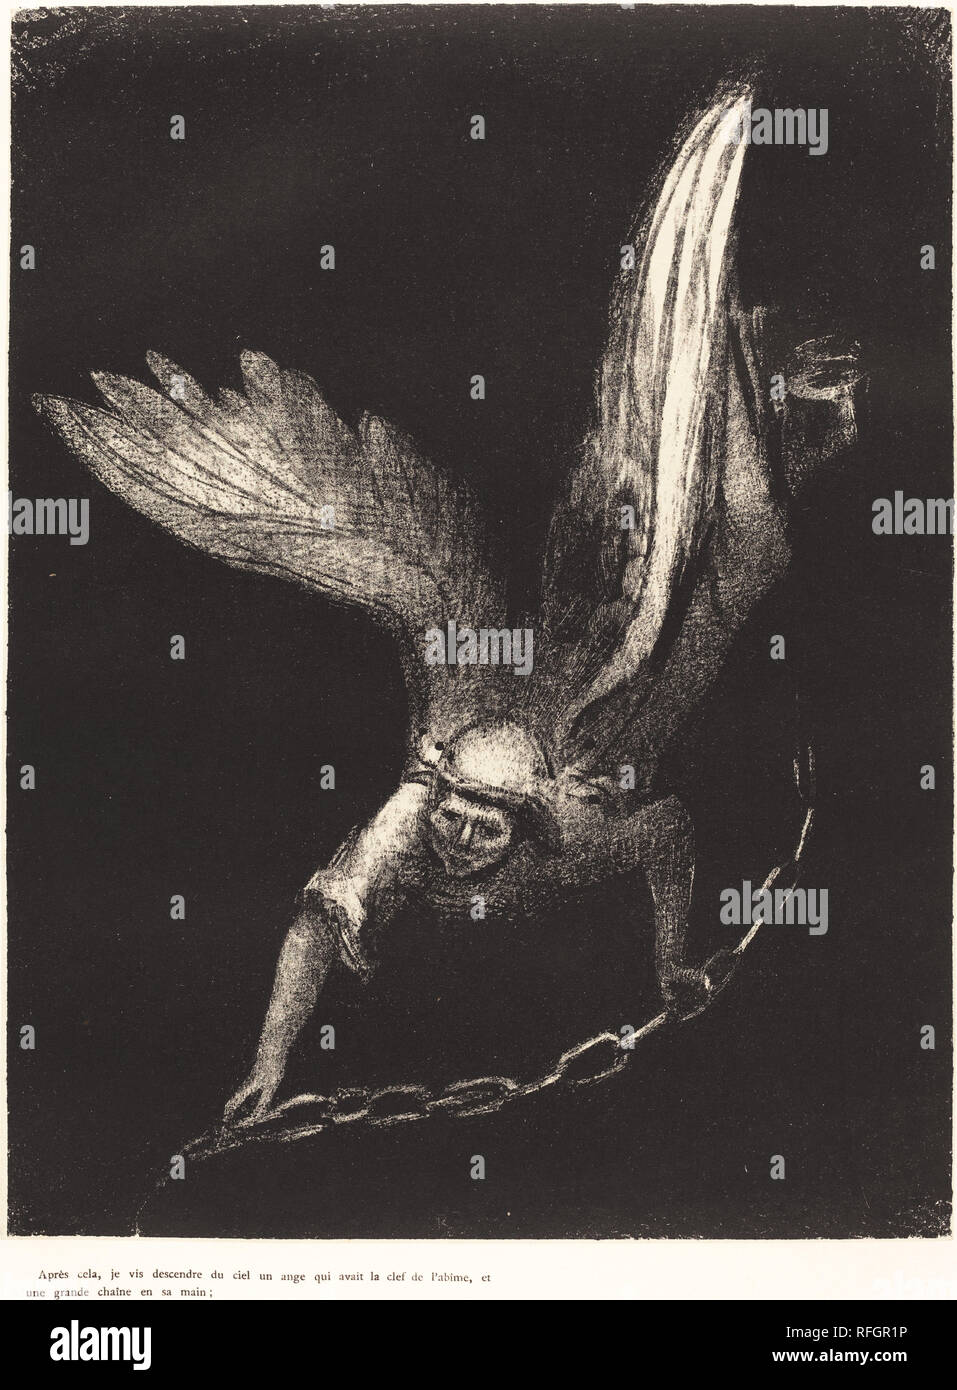 Apres cela je vis descendre du ciel un ange qui avait la clef de l'abime, et une grande chaine en sa main (And I saw an angel come down from heaven, having the key of the bottomless pit and a great chain in his hand). Dated: 1899. Dimensions: image: 30.6 × 23.7 cm (12 1/16 × 9 5/16 in.)  sheet: 54.8 × 41.5 cm (21 9/16 × 16 5/16 in.). Medium: lithograph. Museum: National Gallery of Art, Washington DC. Author: Odilon Redon. Stock Photo